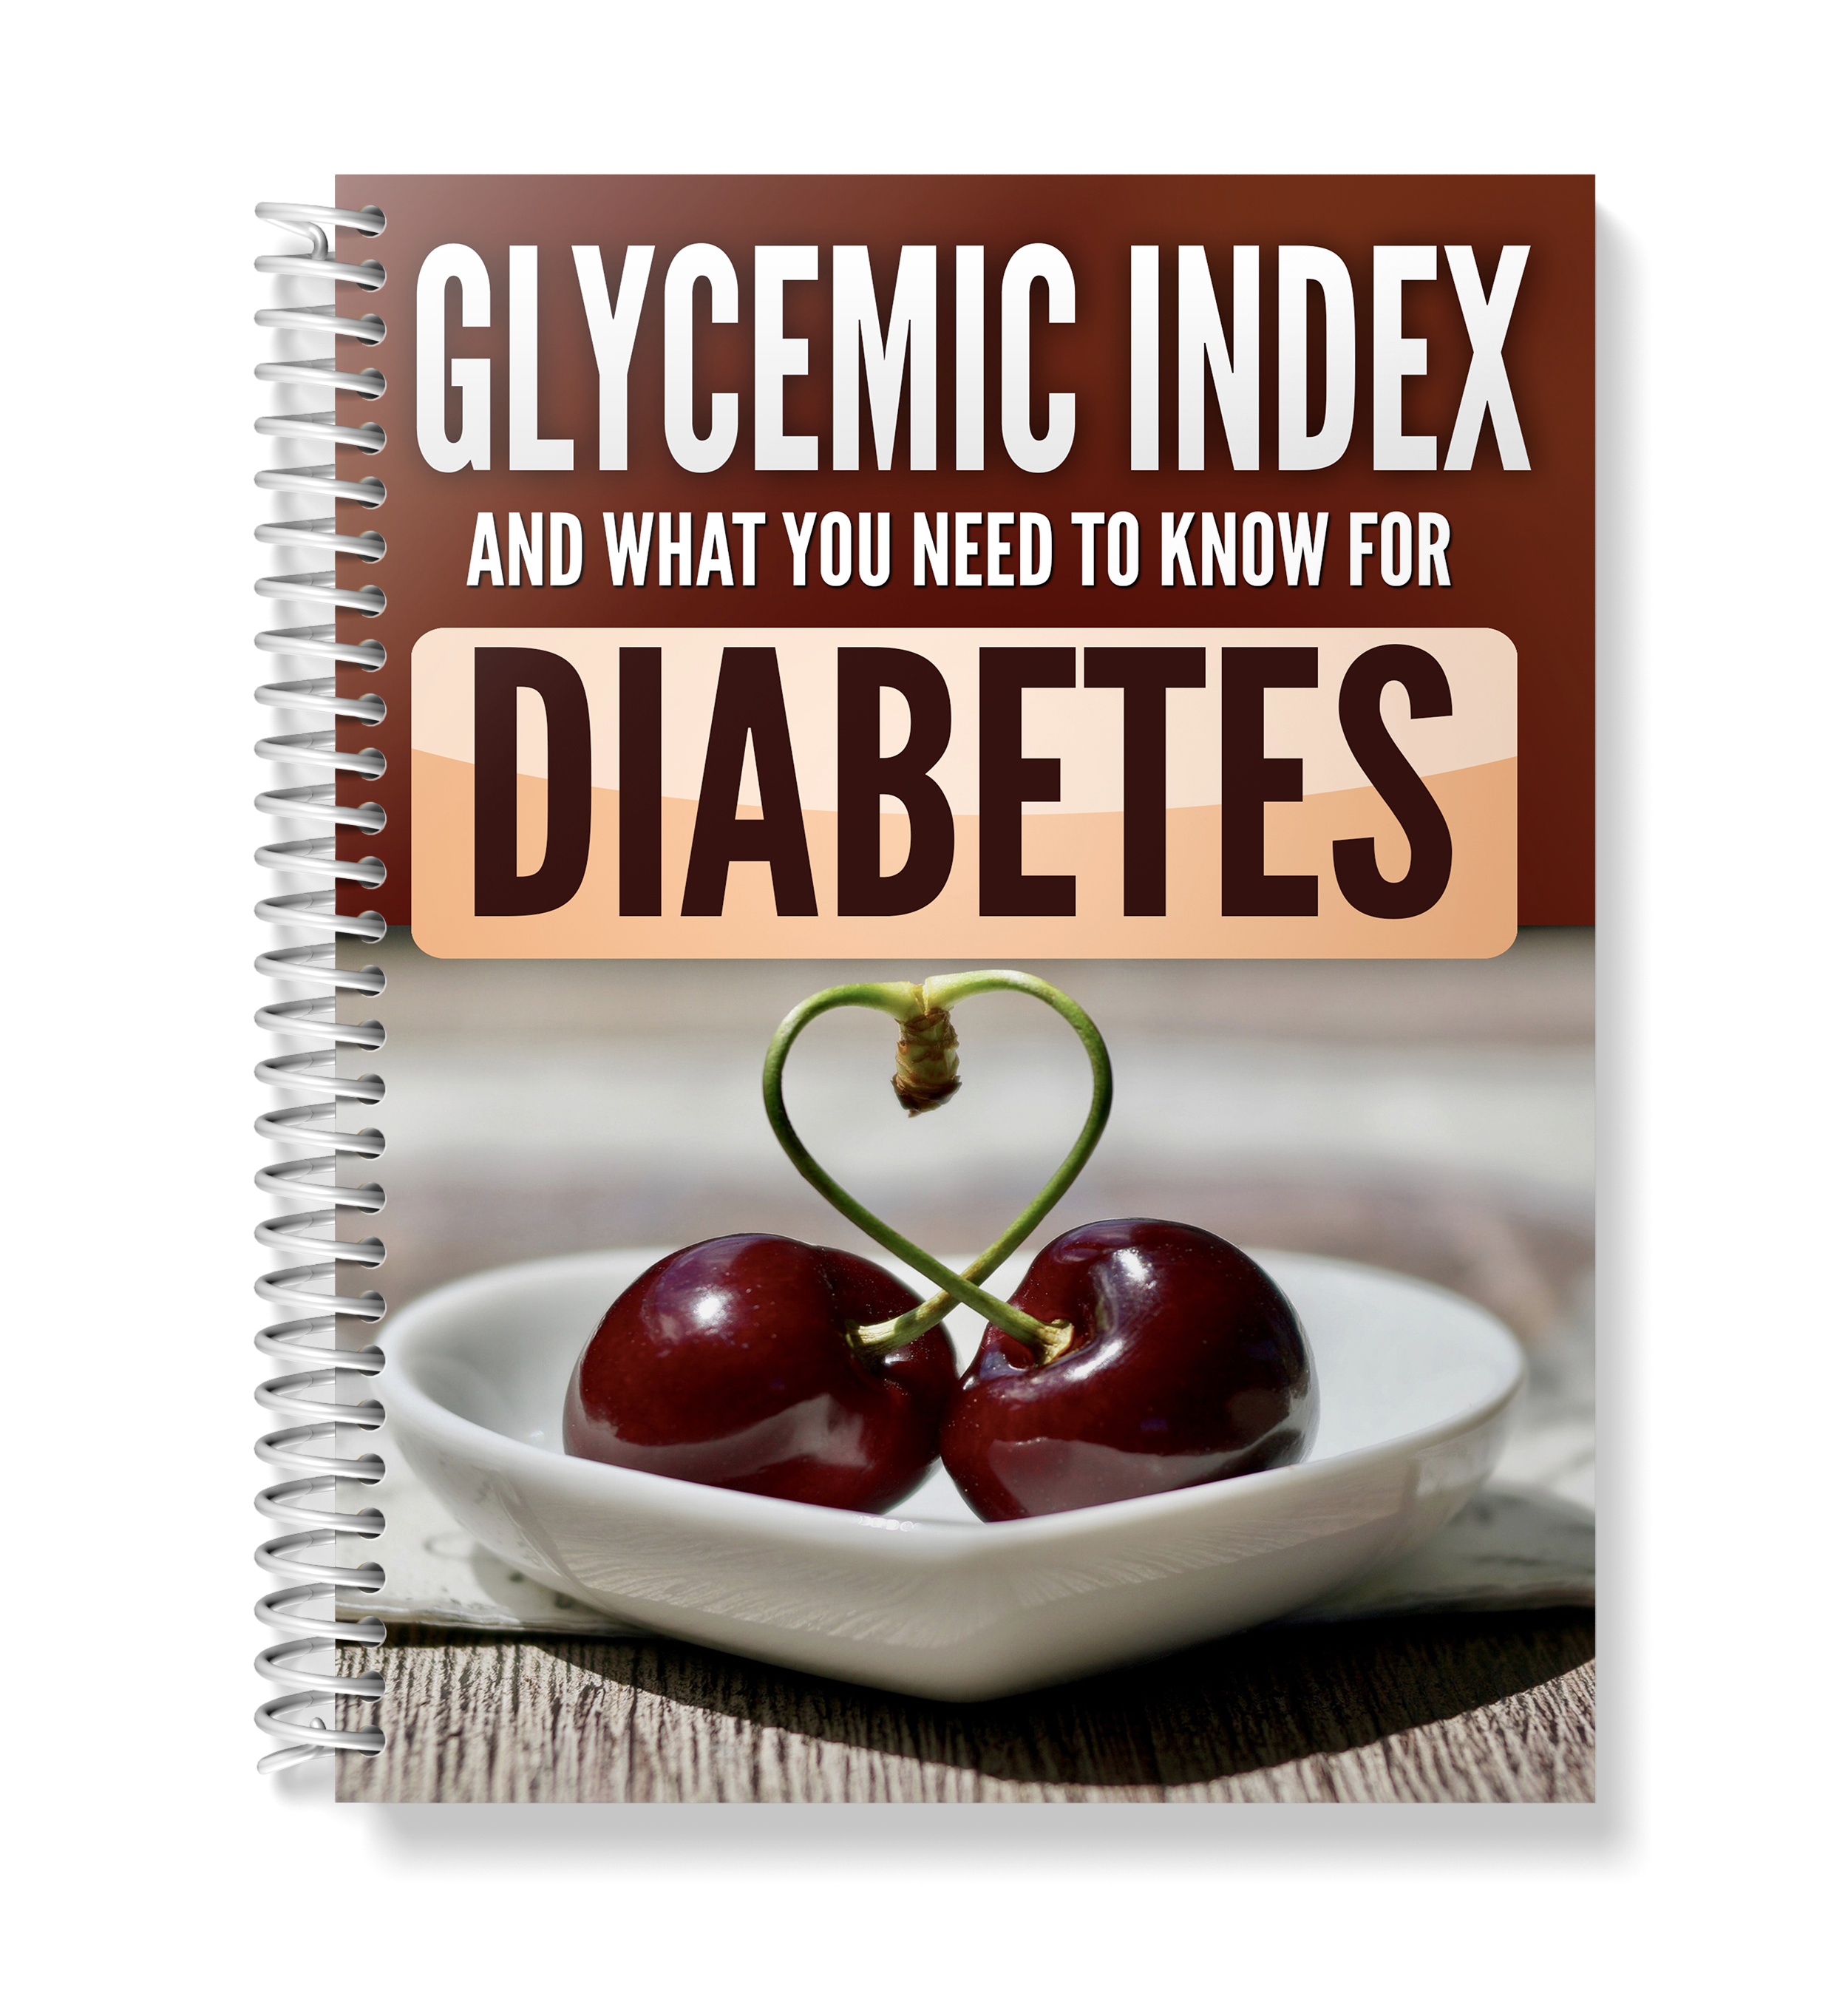 Glycemic Index And Diabetes